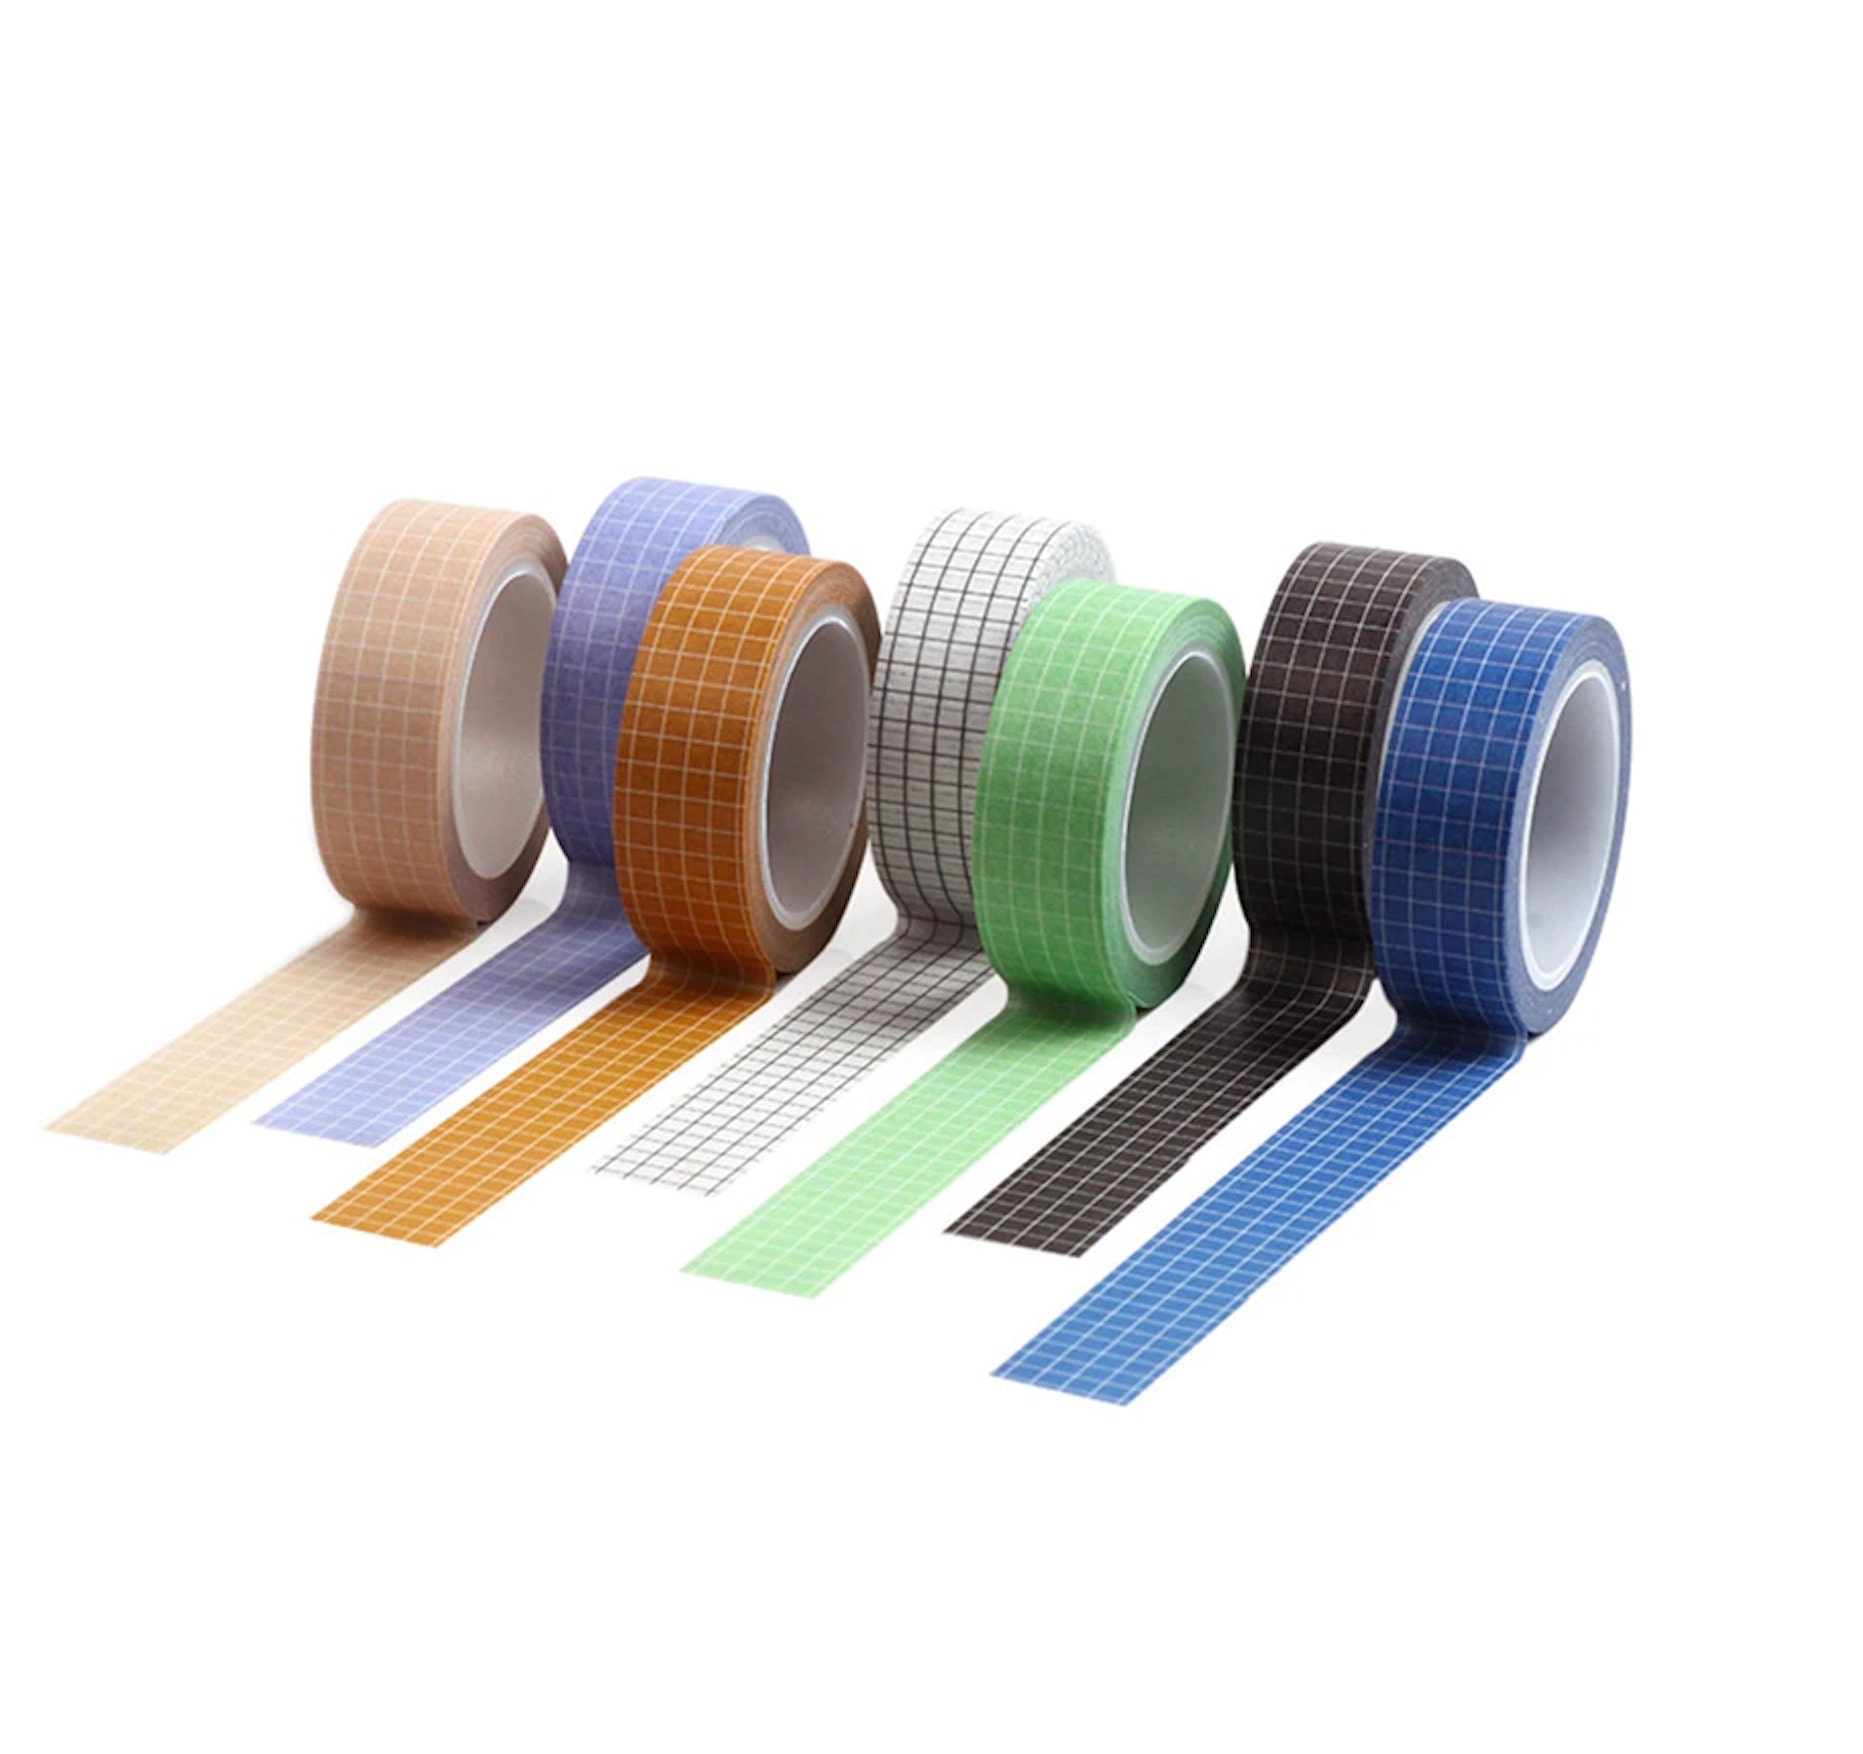  Grid Washi Tape Set - 27 Rolls of 15 mm Wide Decorative Masking  Tapes for Bullet Journals Supplies, DIY Decor Planners, Scrapbooking  Adhesive School/Party Supplies : Arts, Crafts & Sewing